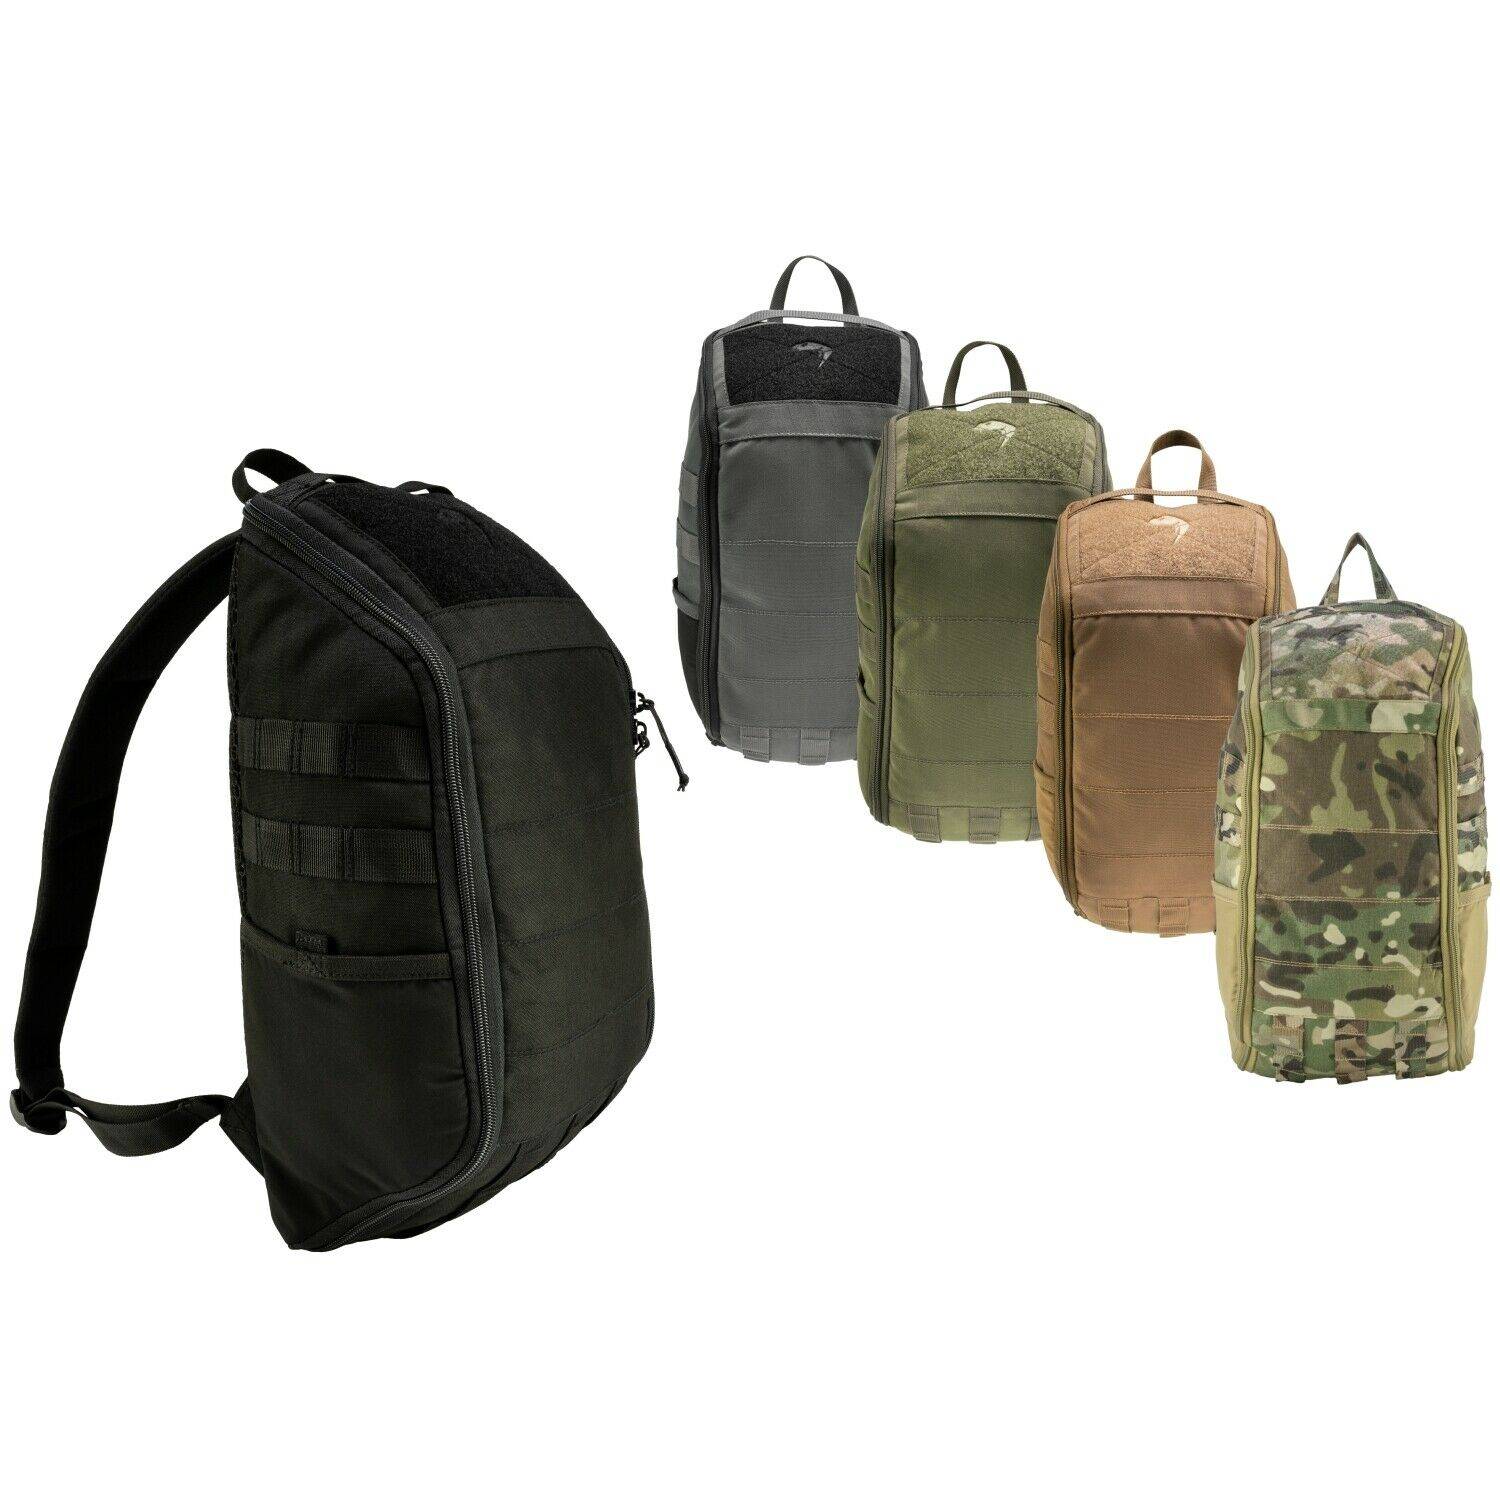 CLEARANCE VIPER TACTICAL VX EXPRESS PACK 15L MOLLE PANEL RUCKSACK BAG AIRSOFT 